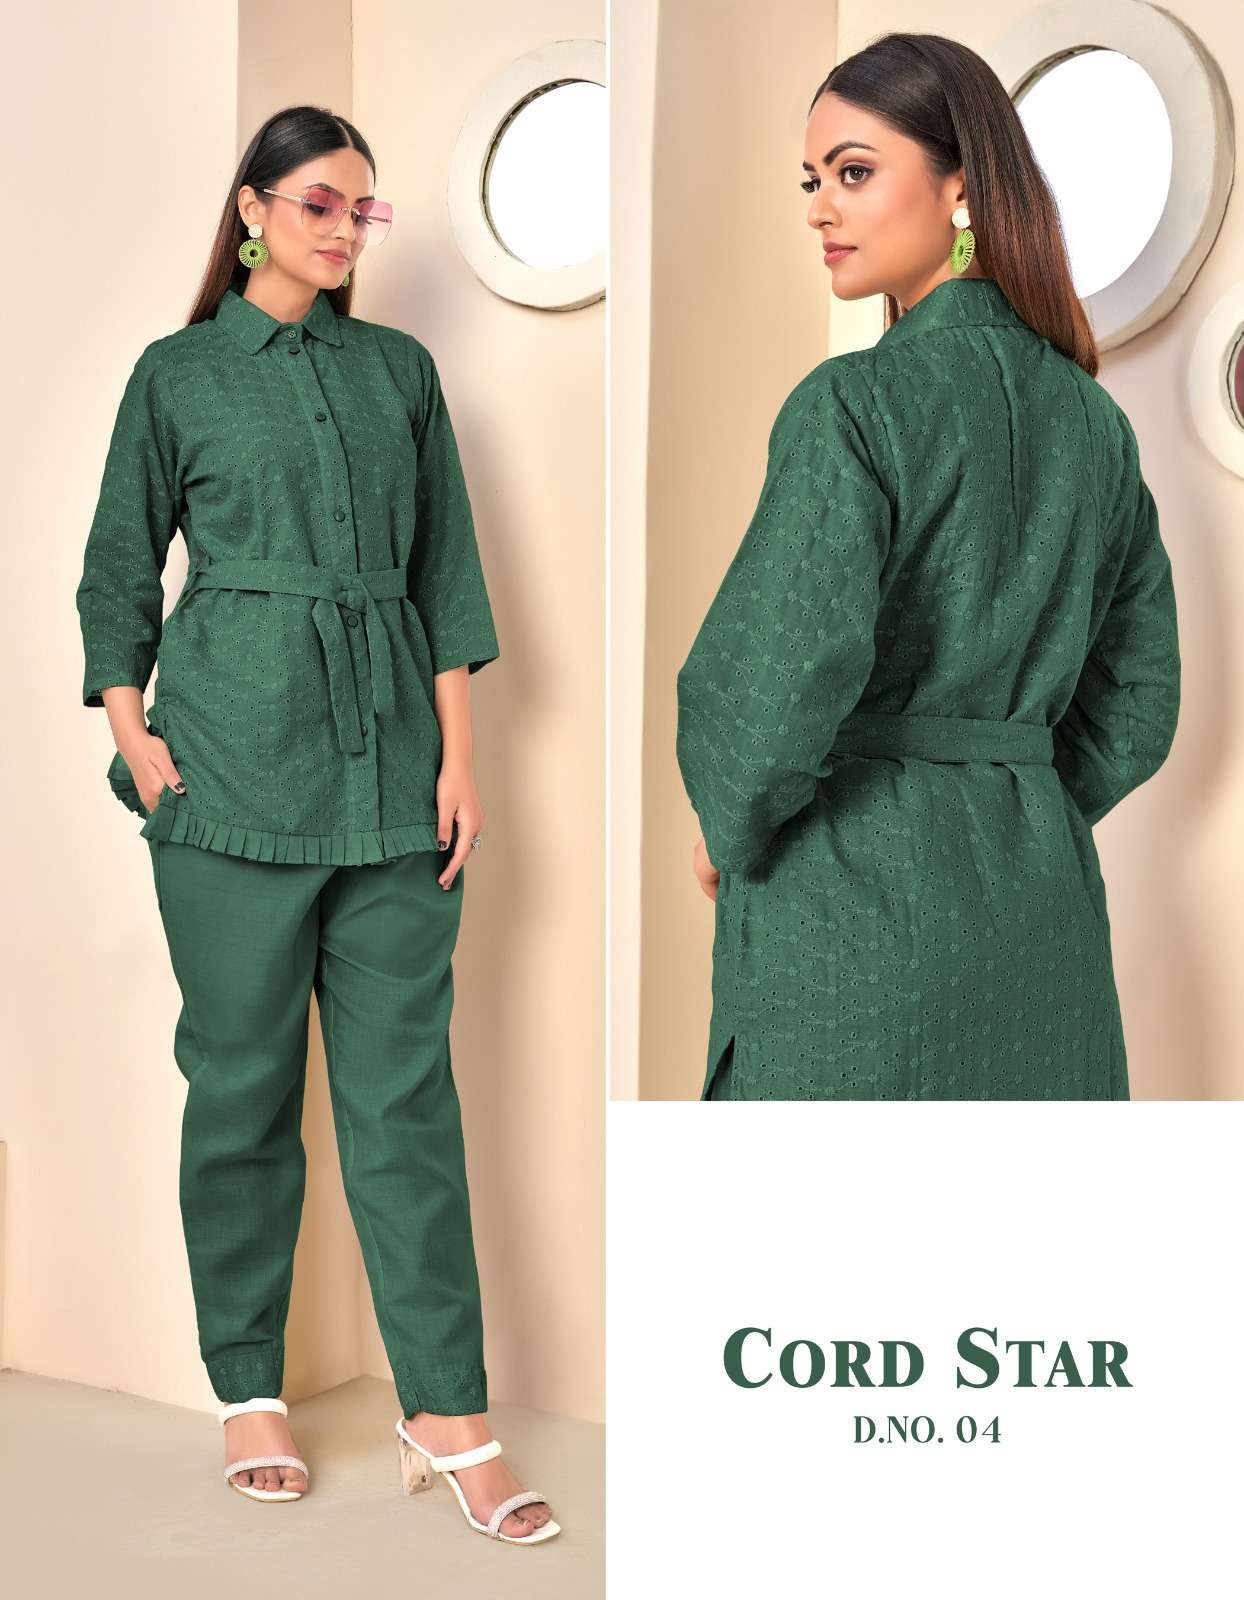 CO-ORD STAR COTTON KURTI WITH BOTTOM CO-ORD SET BY TUNIC HOUSE BRAND WHOLESALR AND DELER